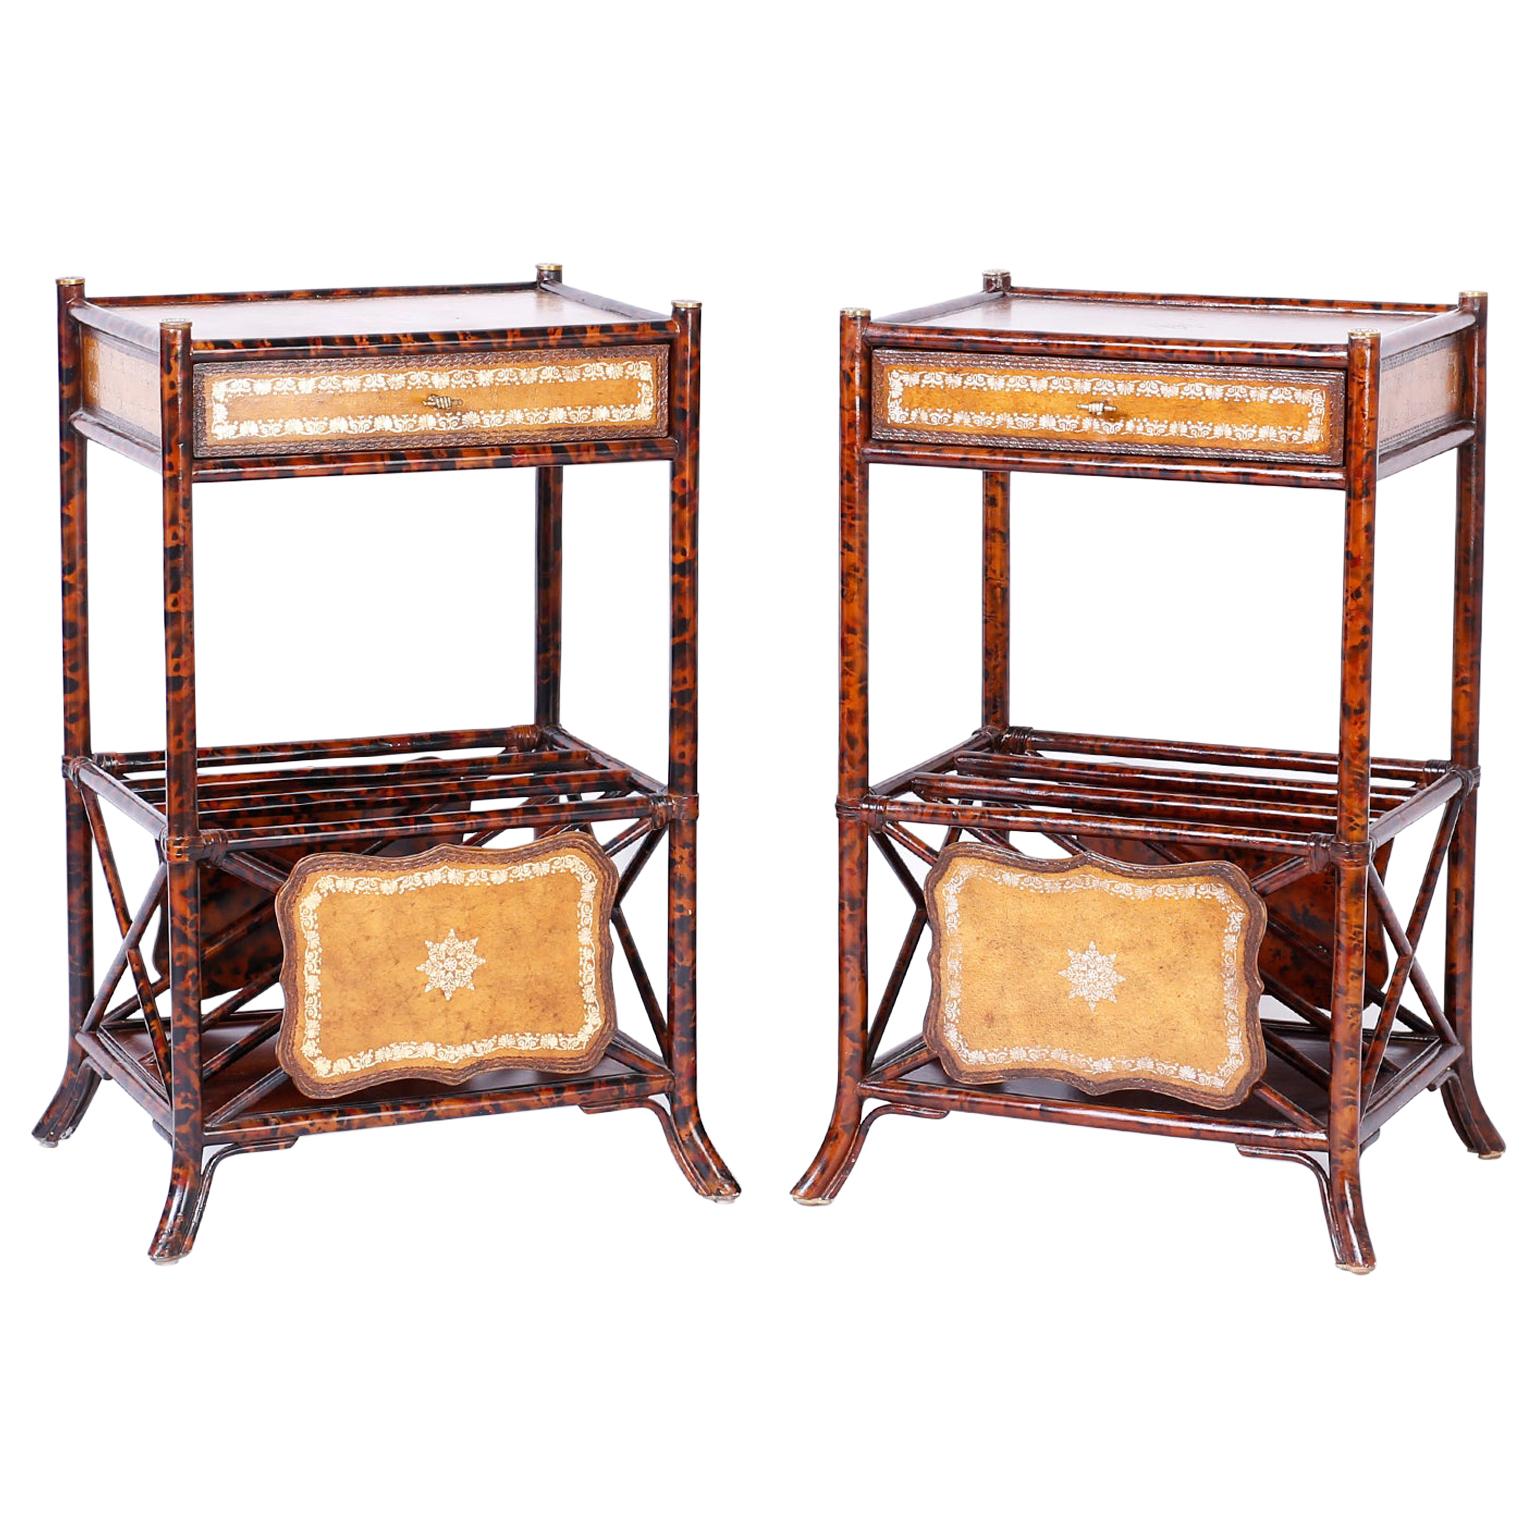 Pair of Faux Tortoise Bamboo Stands with Magazine Racks